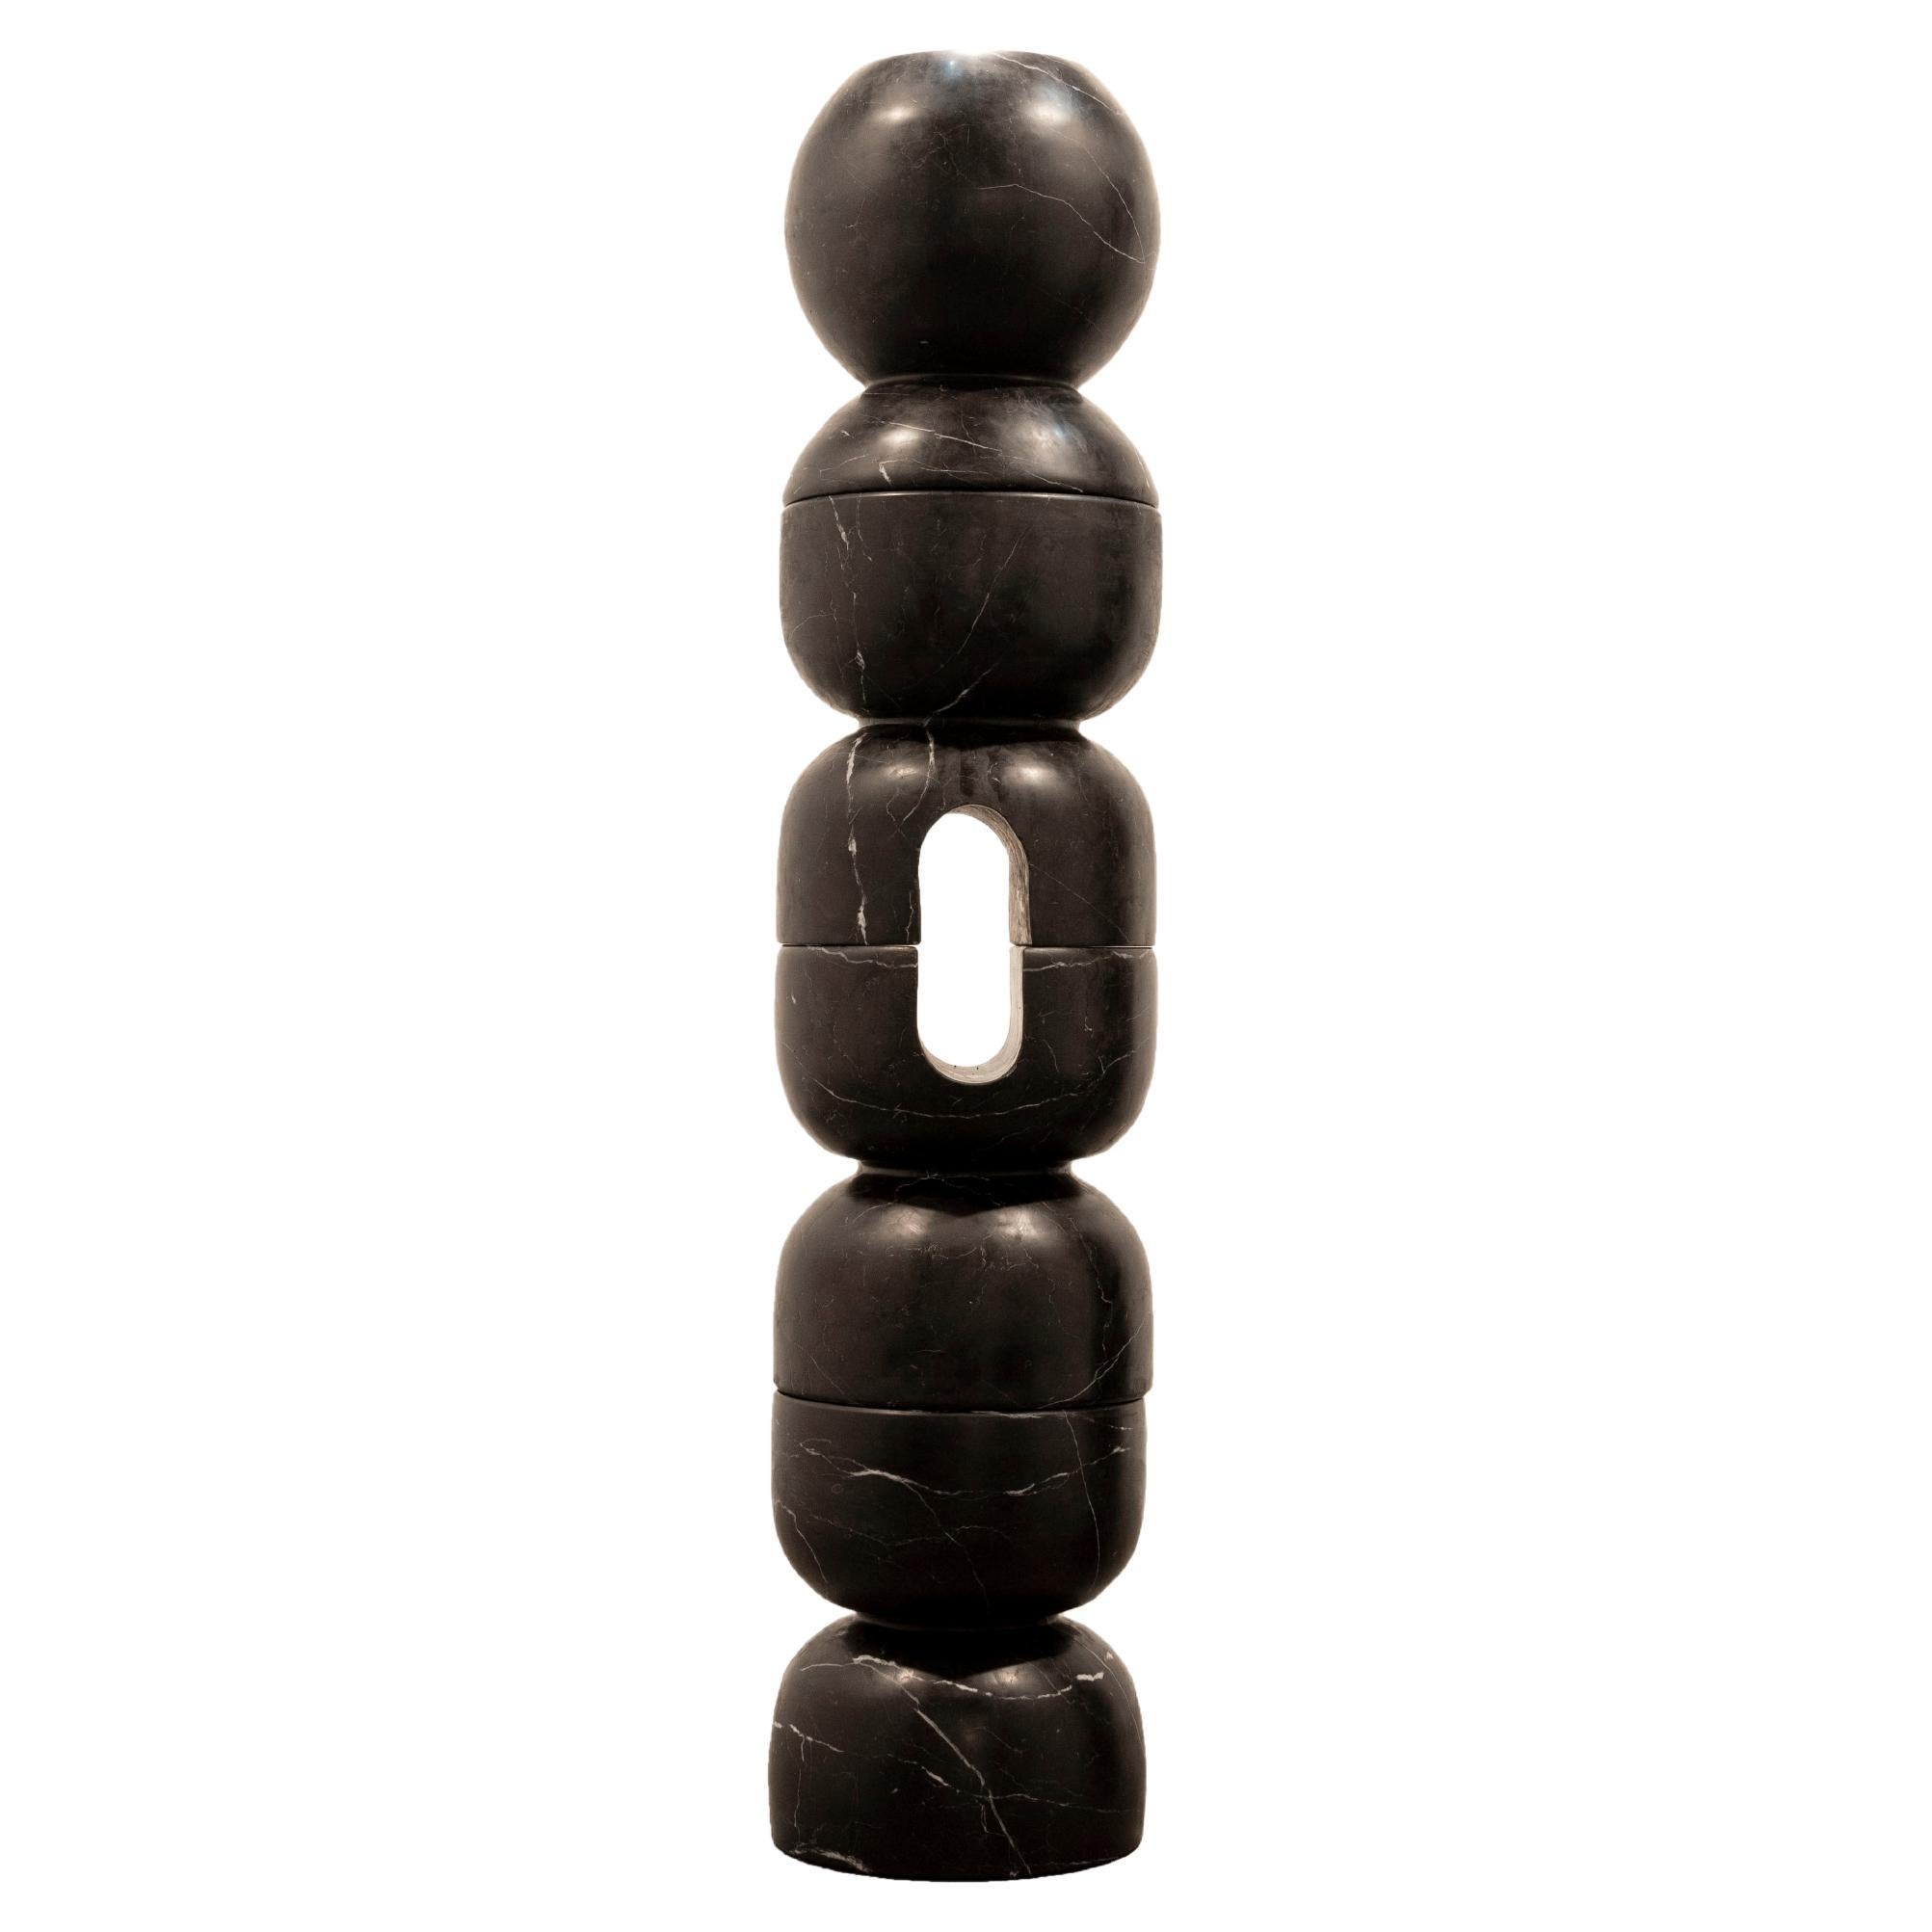 NERU TOTEM, Handcrafted Marble Sculpture (#B) by Rebeca Cors